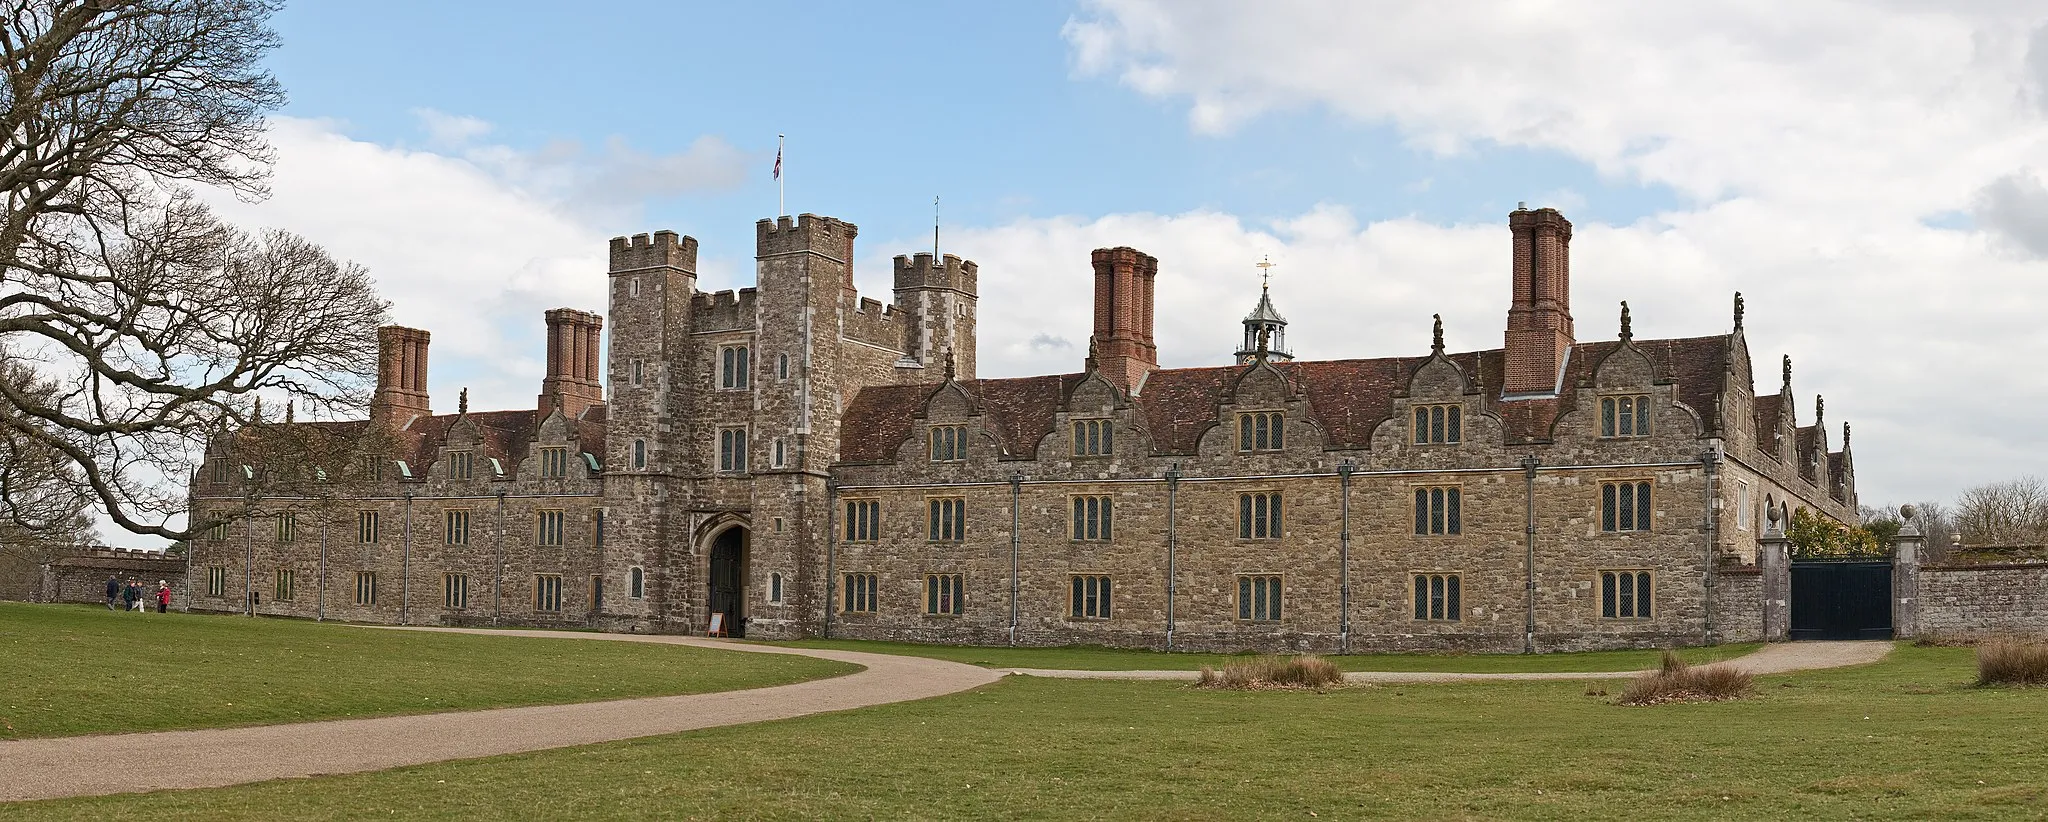 Photo showing: Knole as viewed from the grounds. Taken as a 5 segment panorama with a Canon 5D and 70-200mm f/2.8L lens.